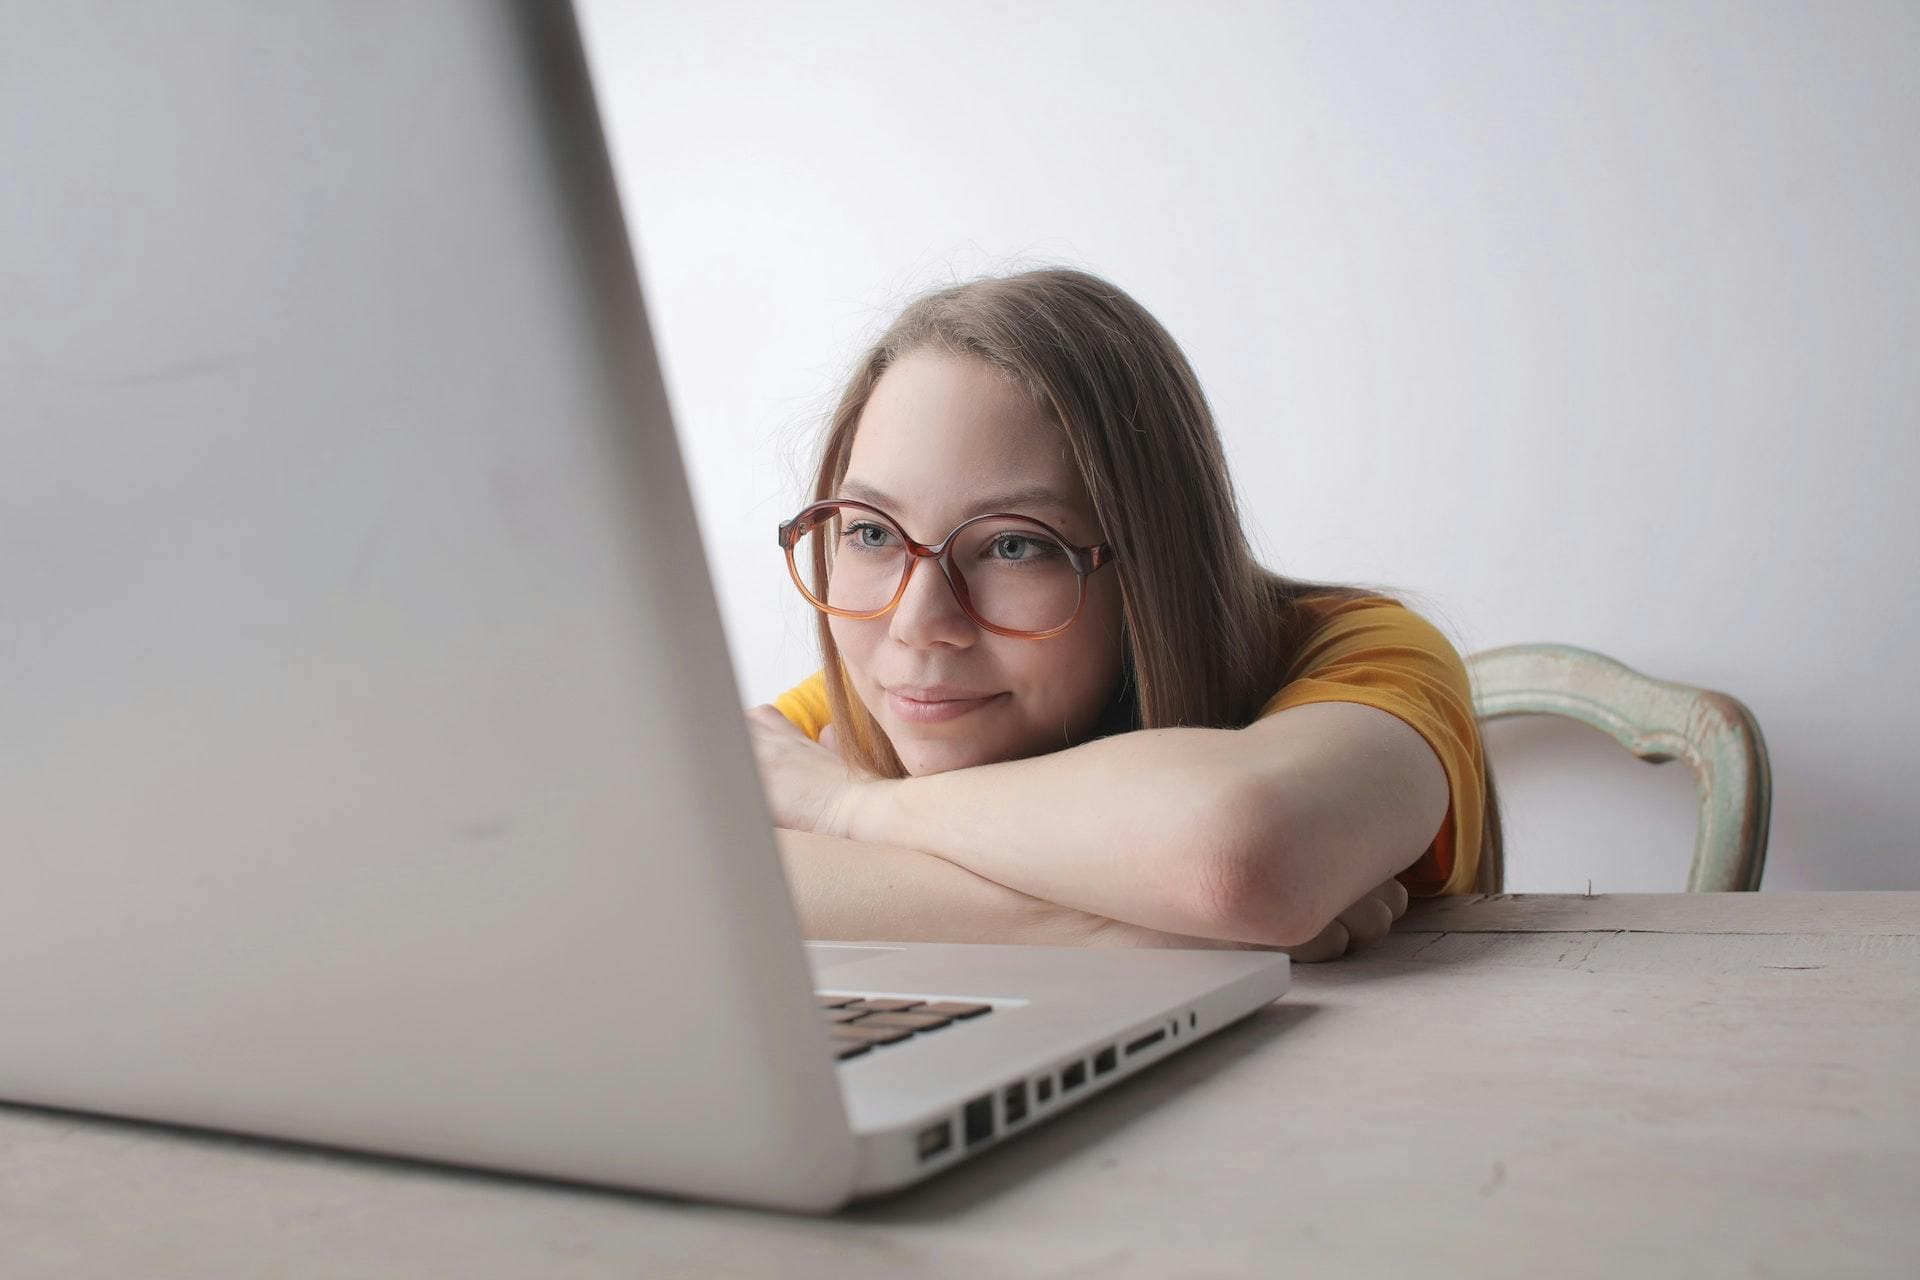 Freelancer wearing glasses leaning over desk staring at laptop and smiling